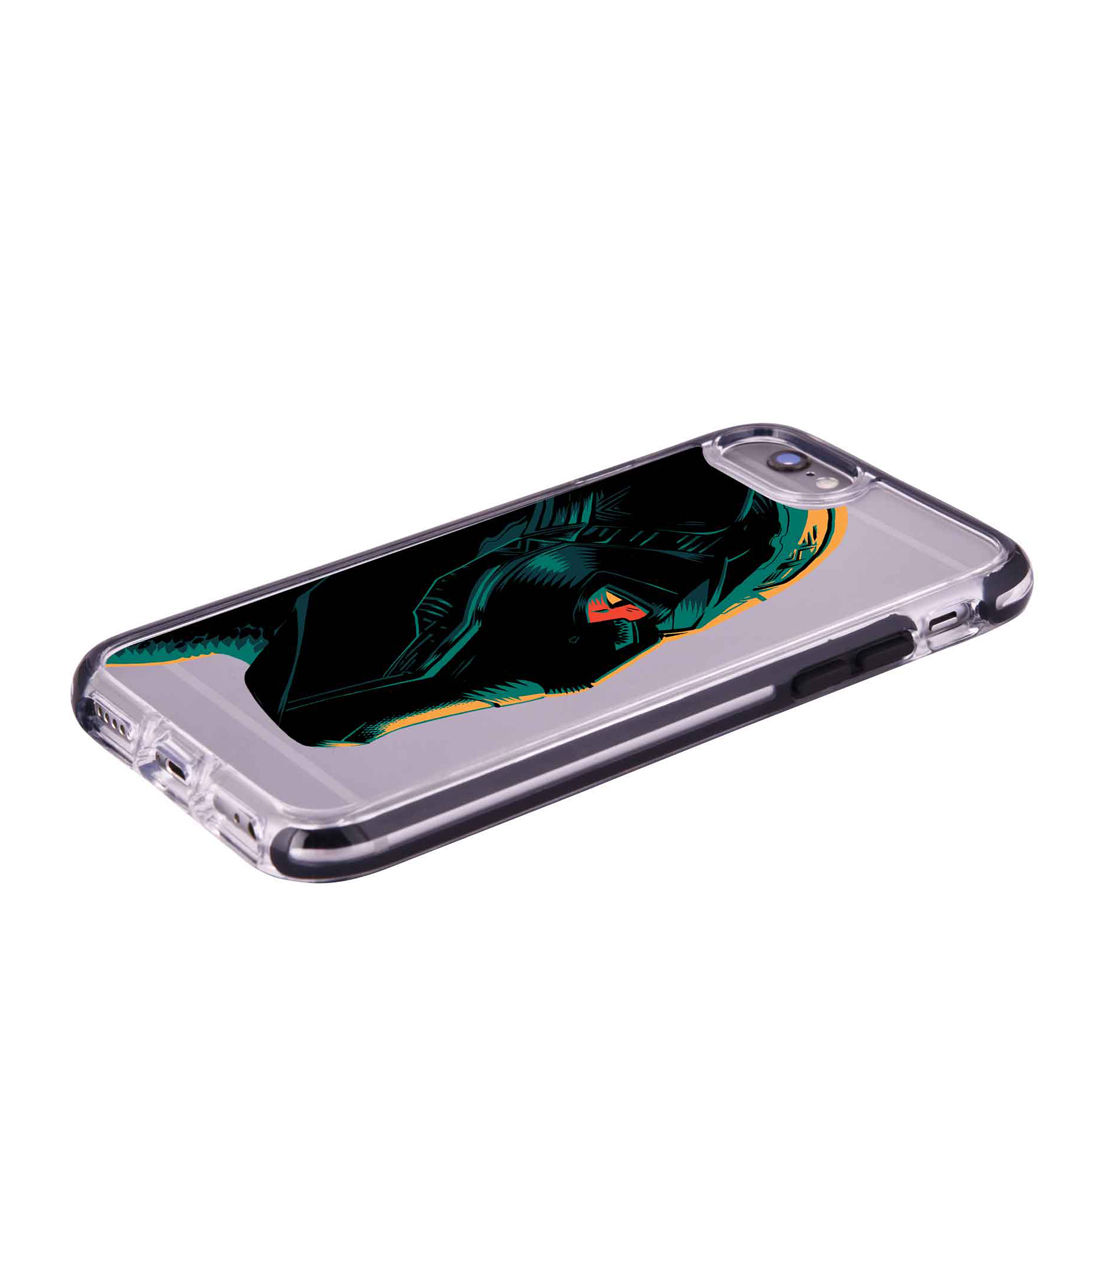 Illuminated Black Panther - Extreme Phone Case for iPhone 6S Plus